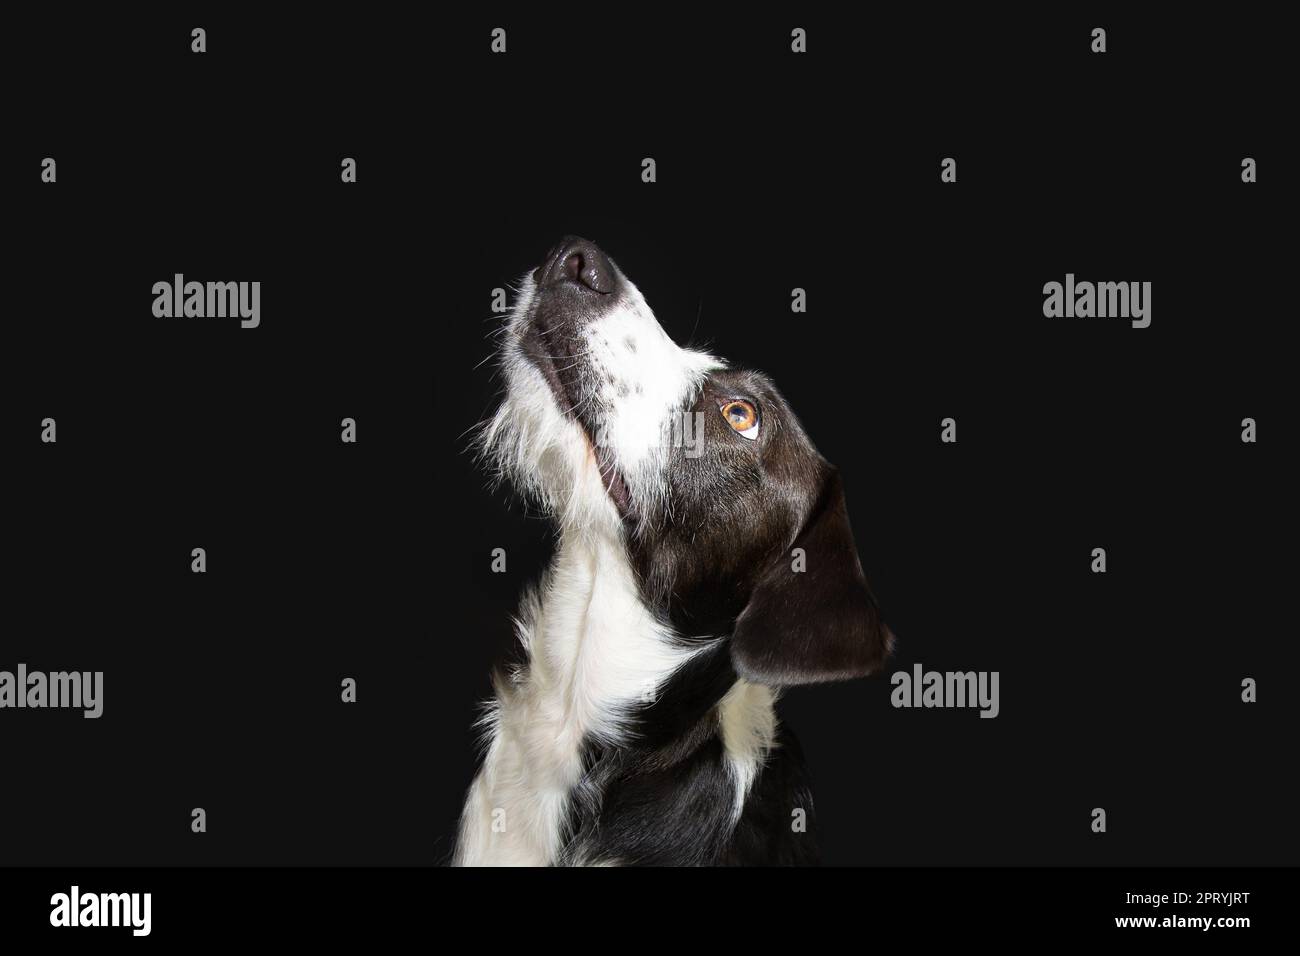 Portrait black ans white puppy dog looking up begging food or obedience concept. Isolated on black dark background Stock Photo